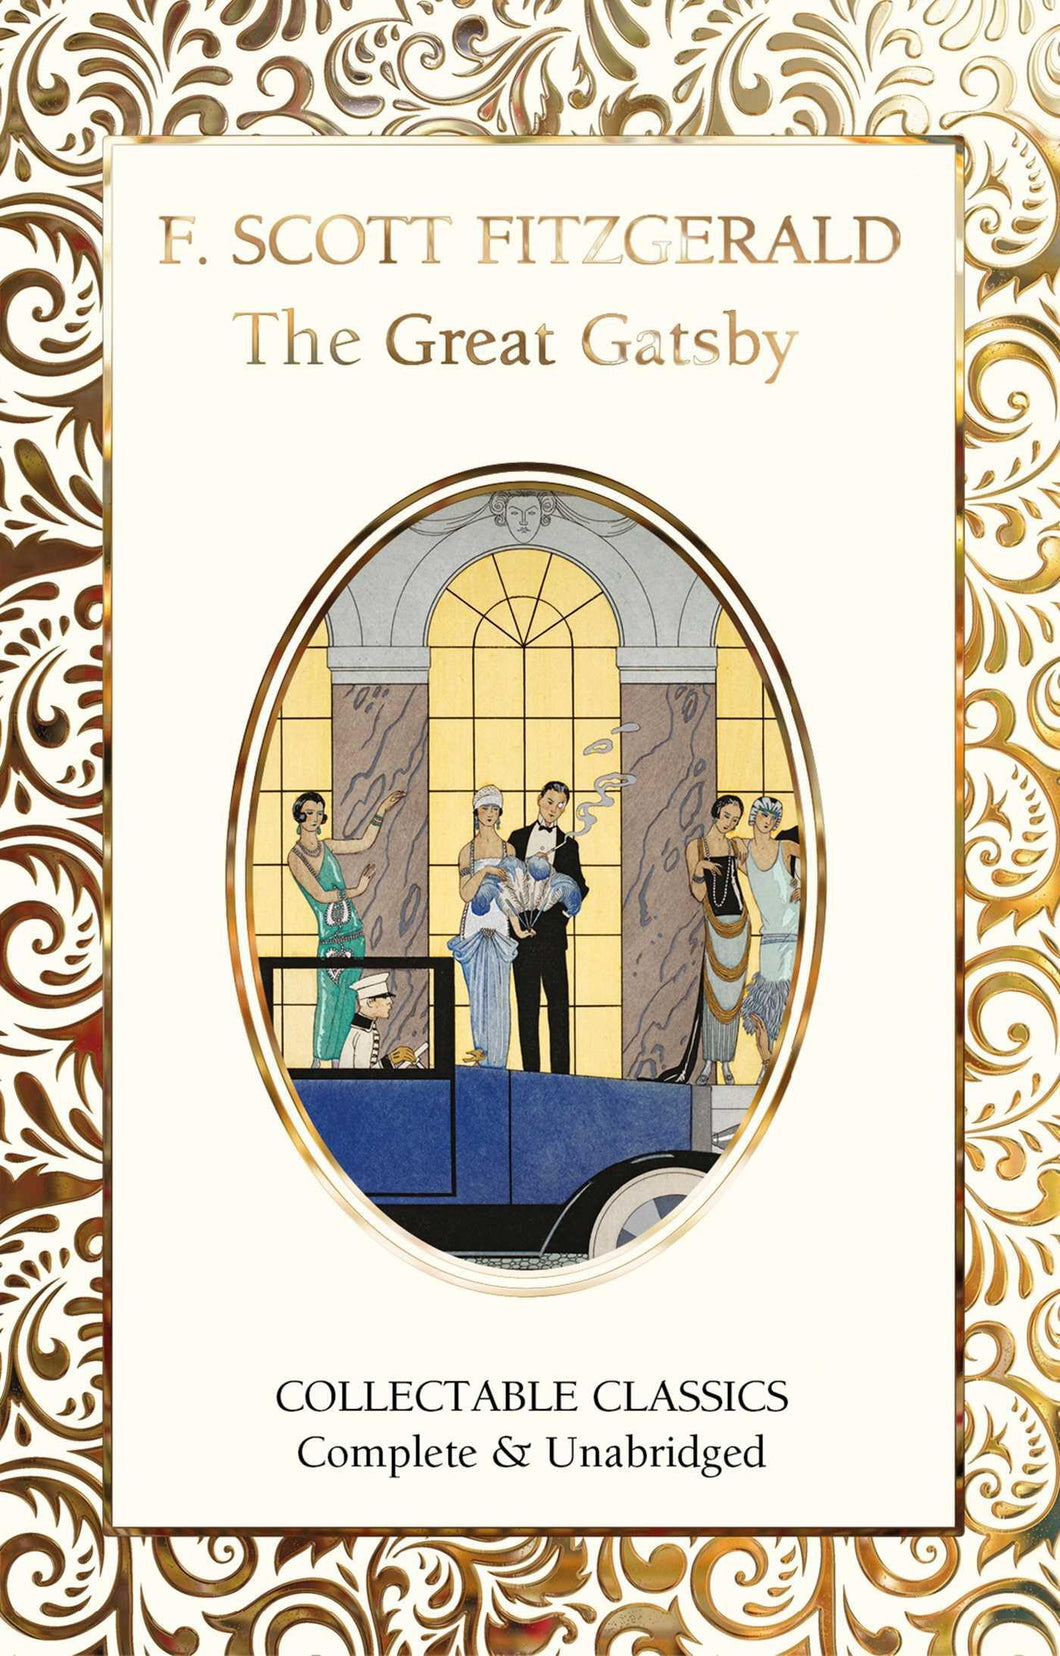 Collectable Classics: The Great Gatesby by F. Scott Fitzgerald